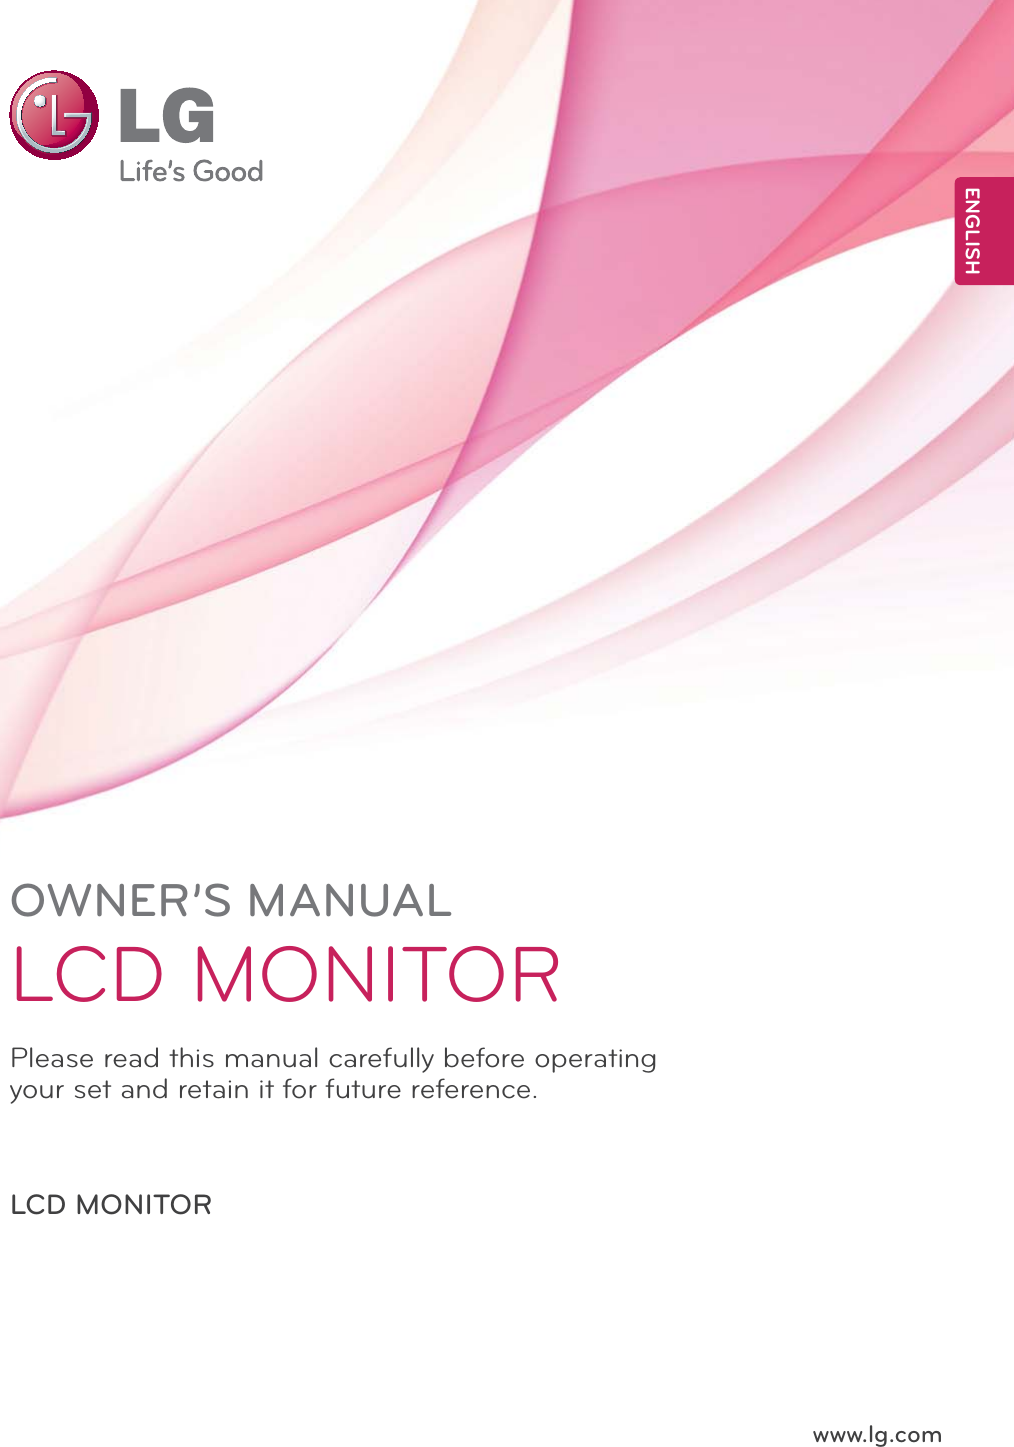 www.lg.comOWNER’S MANUALLCD MONITORIPS225TIPS235TPlease read this manual carefully before operating your set and retain it for future reference.LCD MONITOR MODELENGLISH